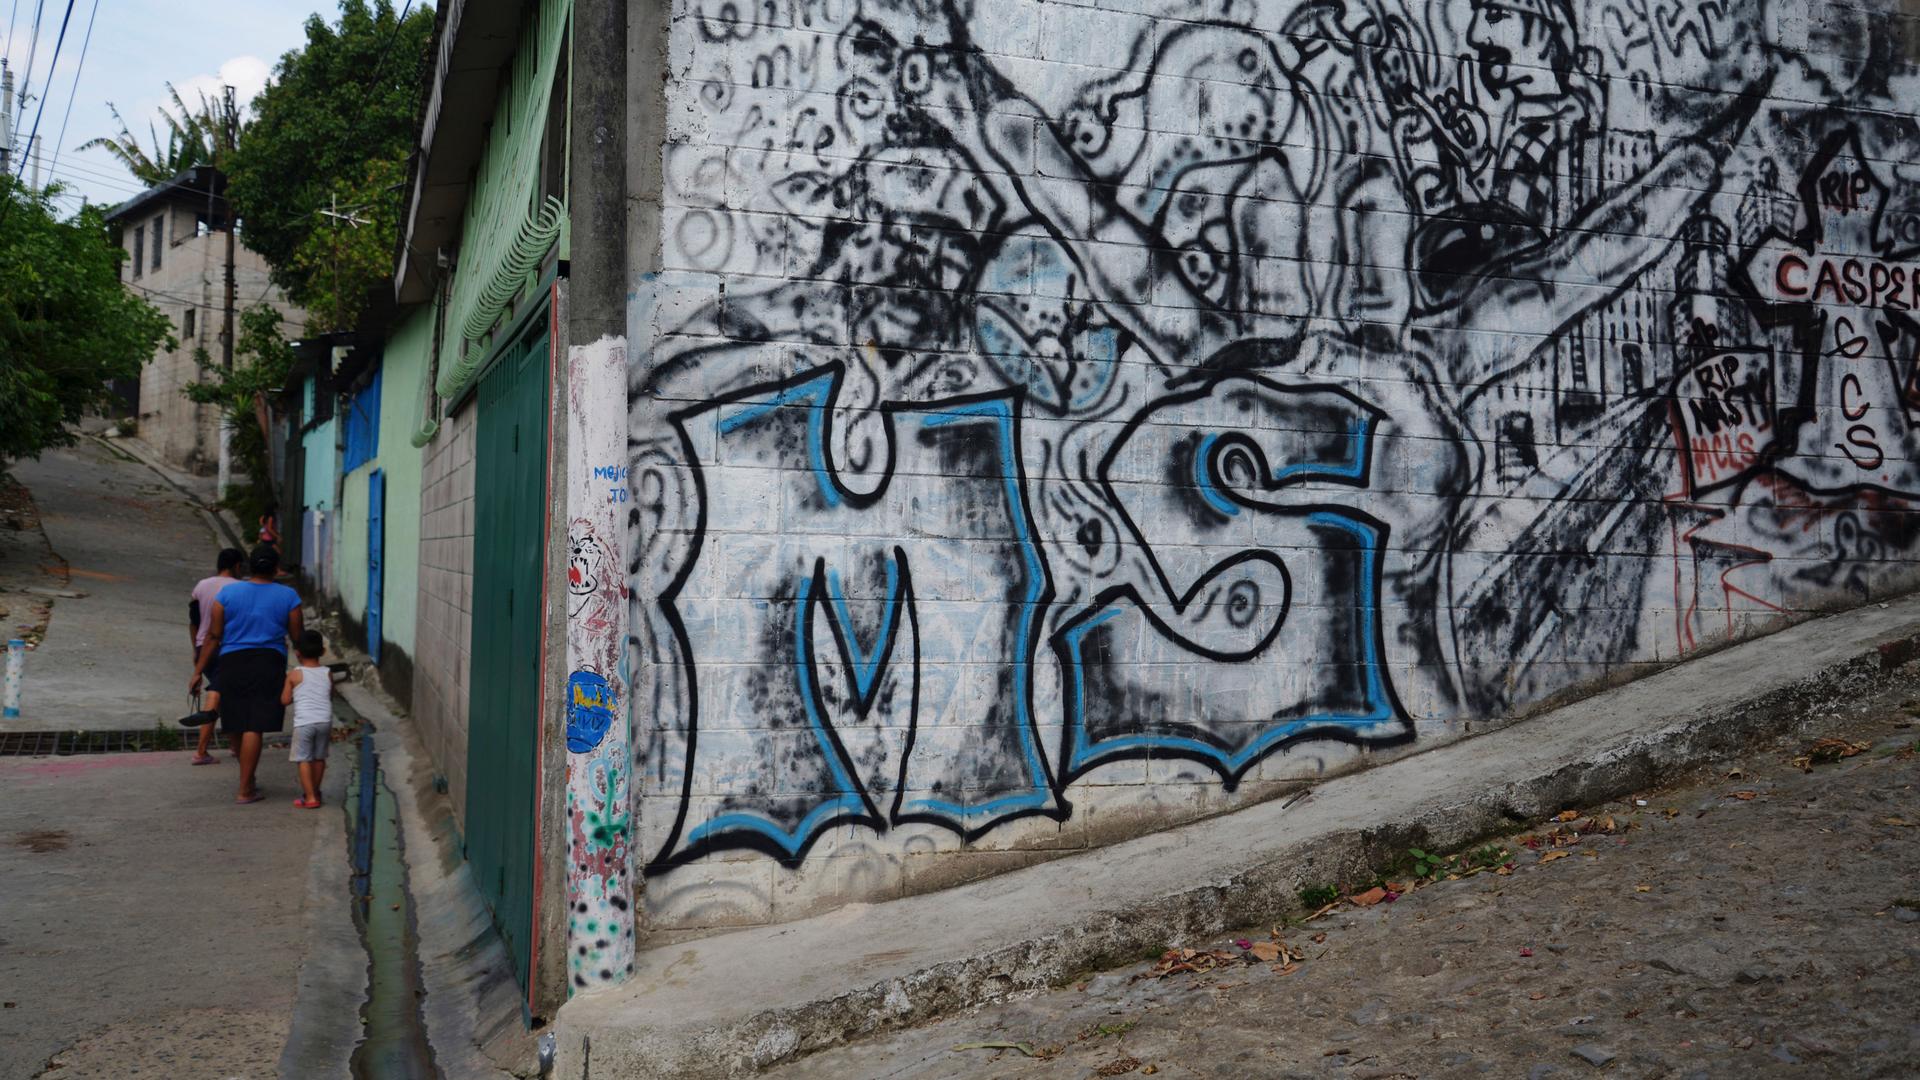 Graffiti of the letters "MS", which stand for the street gang Mara Salvatrucha, photographed in San Salvador on April 22, 2014. Mara Salvatrucha (MS-13) and Calle 18 are rival gangs that started in Los Angeles but now have a heavy presence in El Salvador.